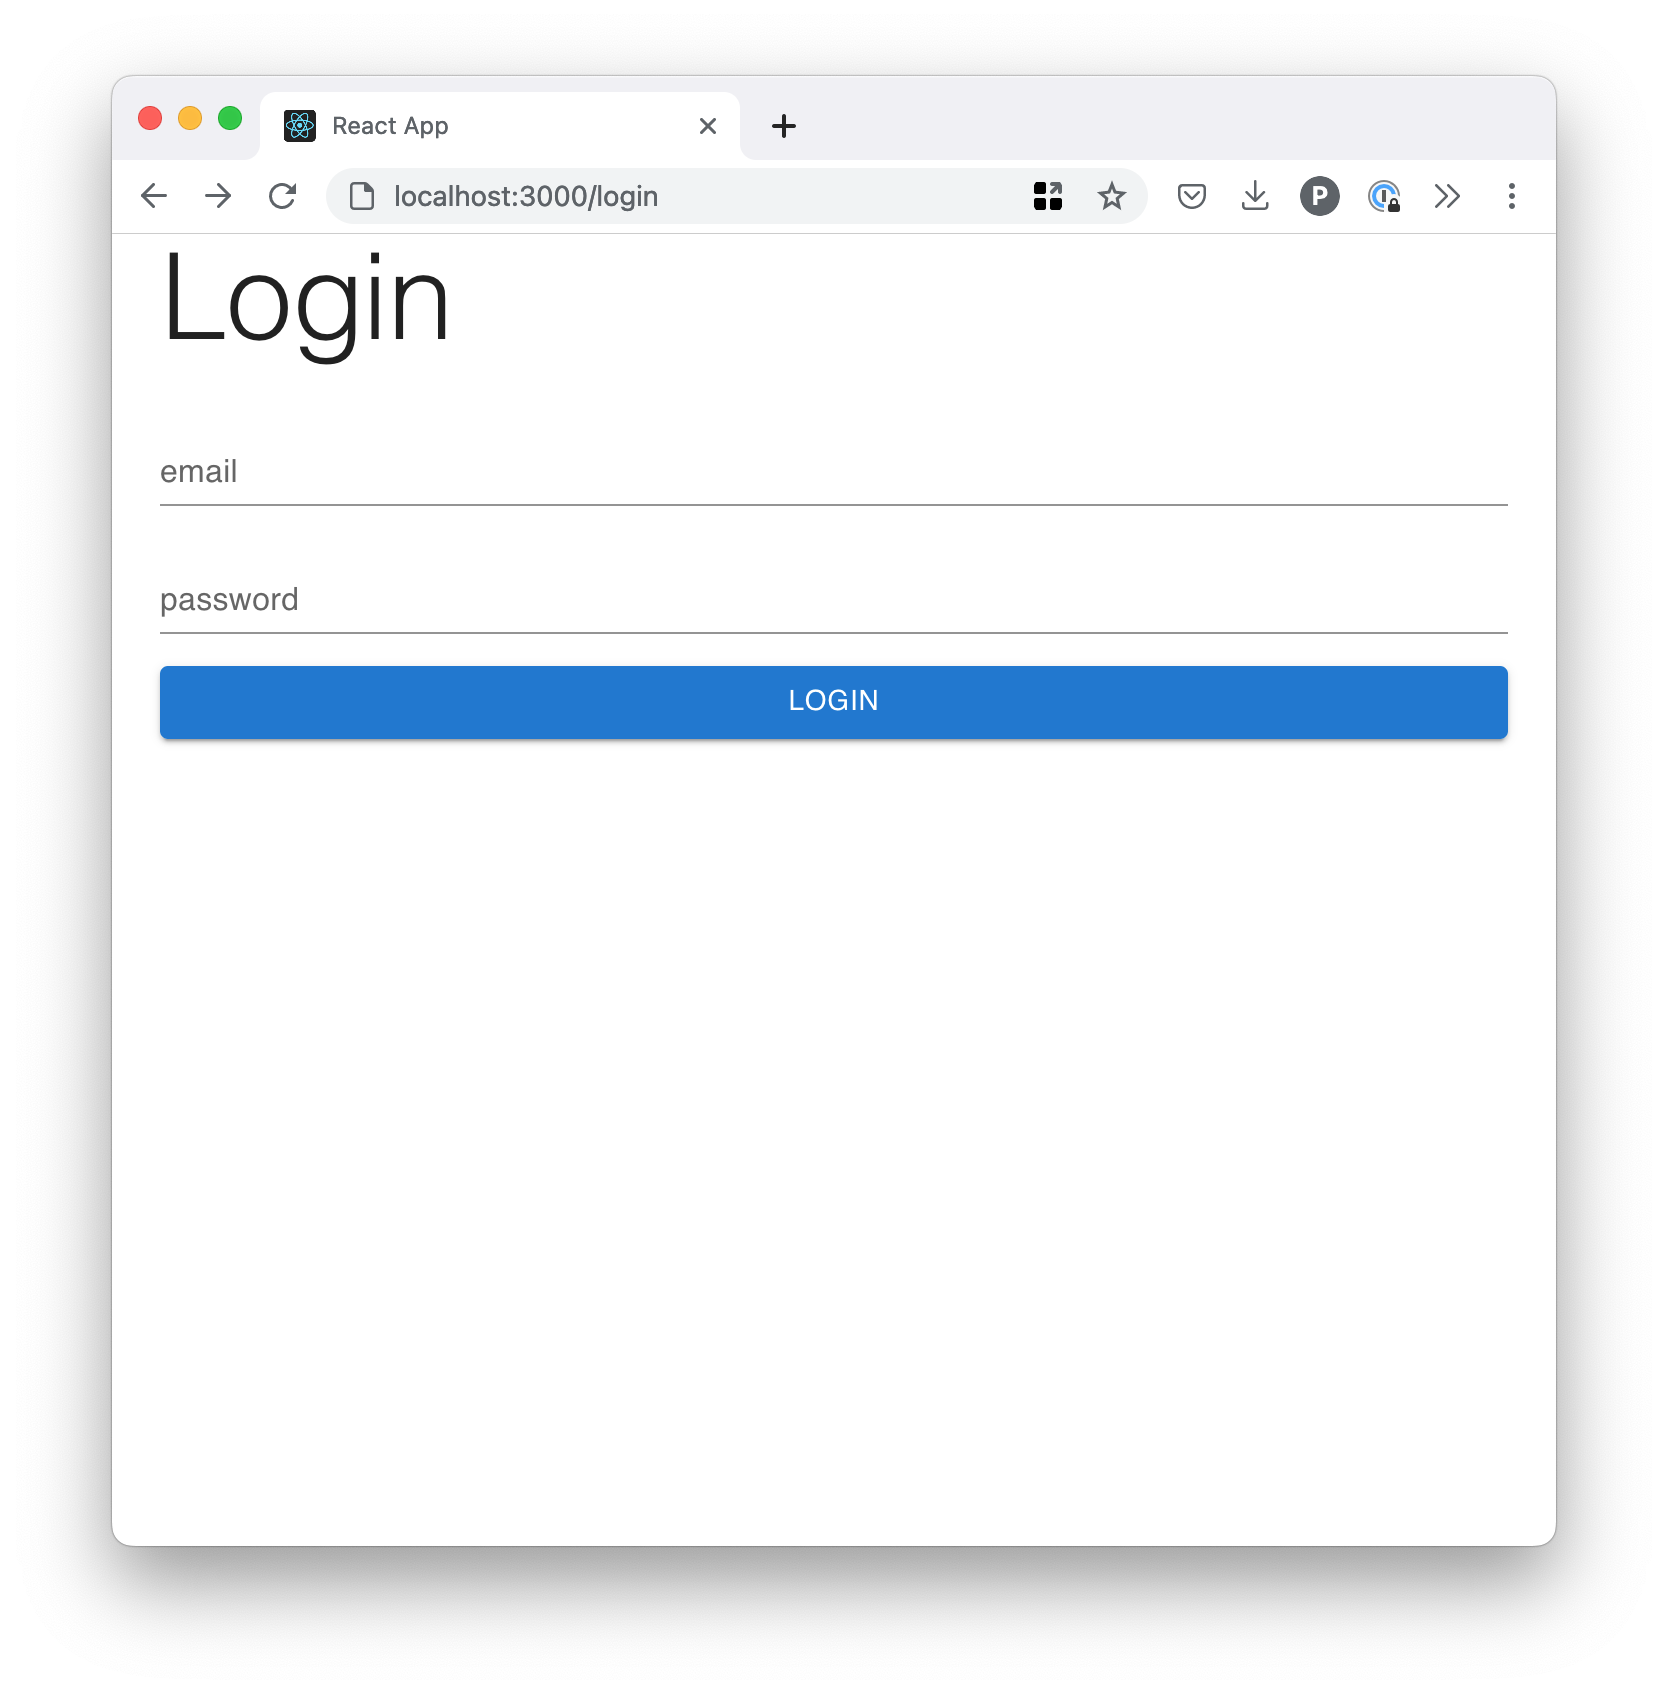 Initial Login Page